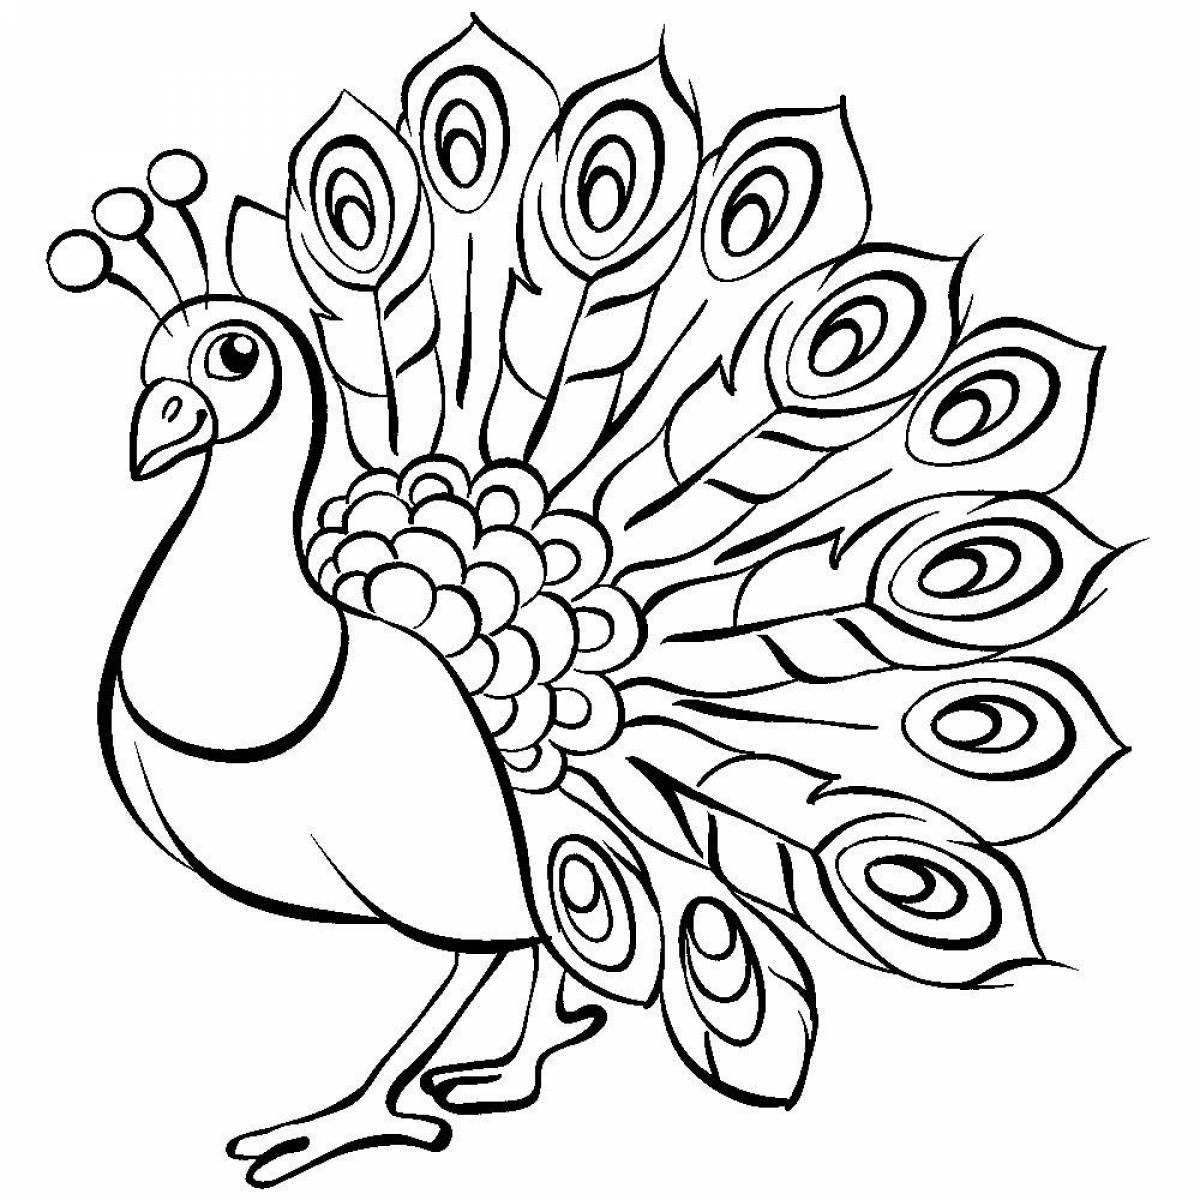 Gorgeous fiery bird coloring book for kids